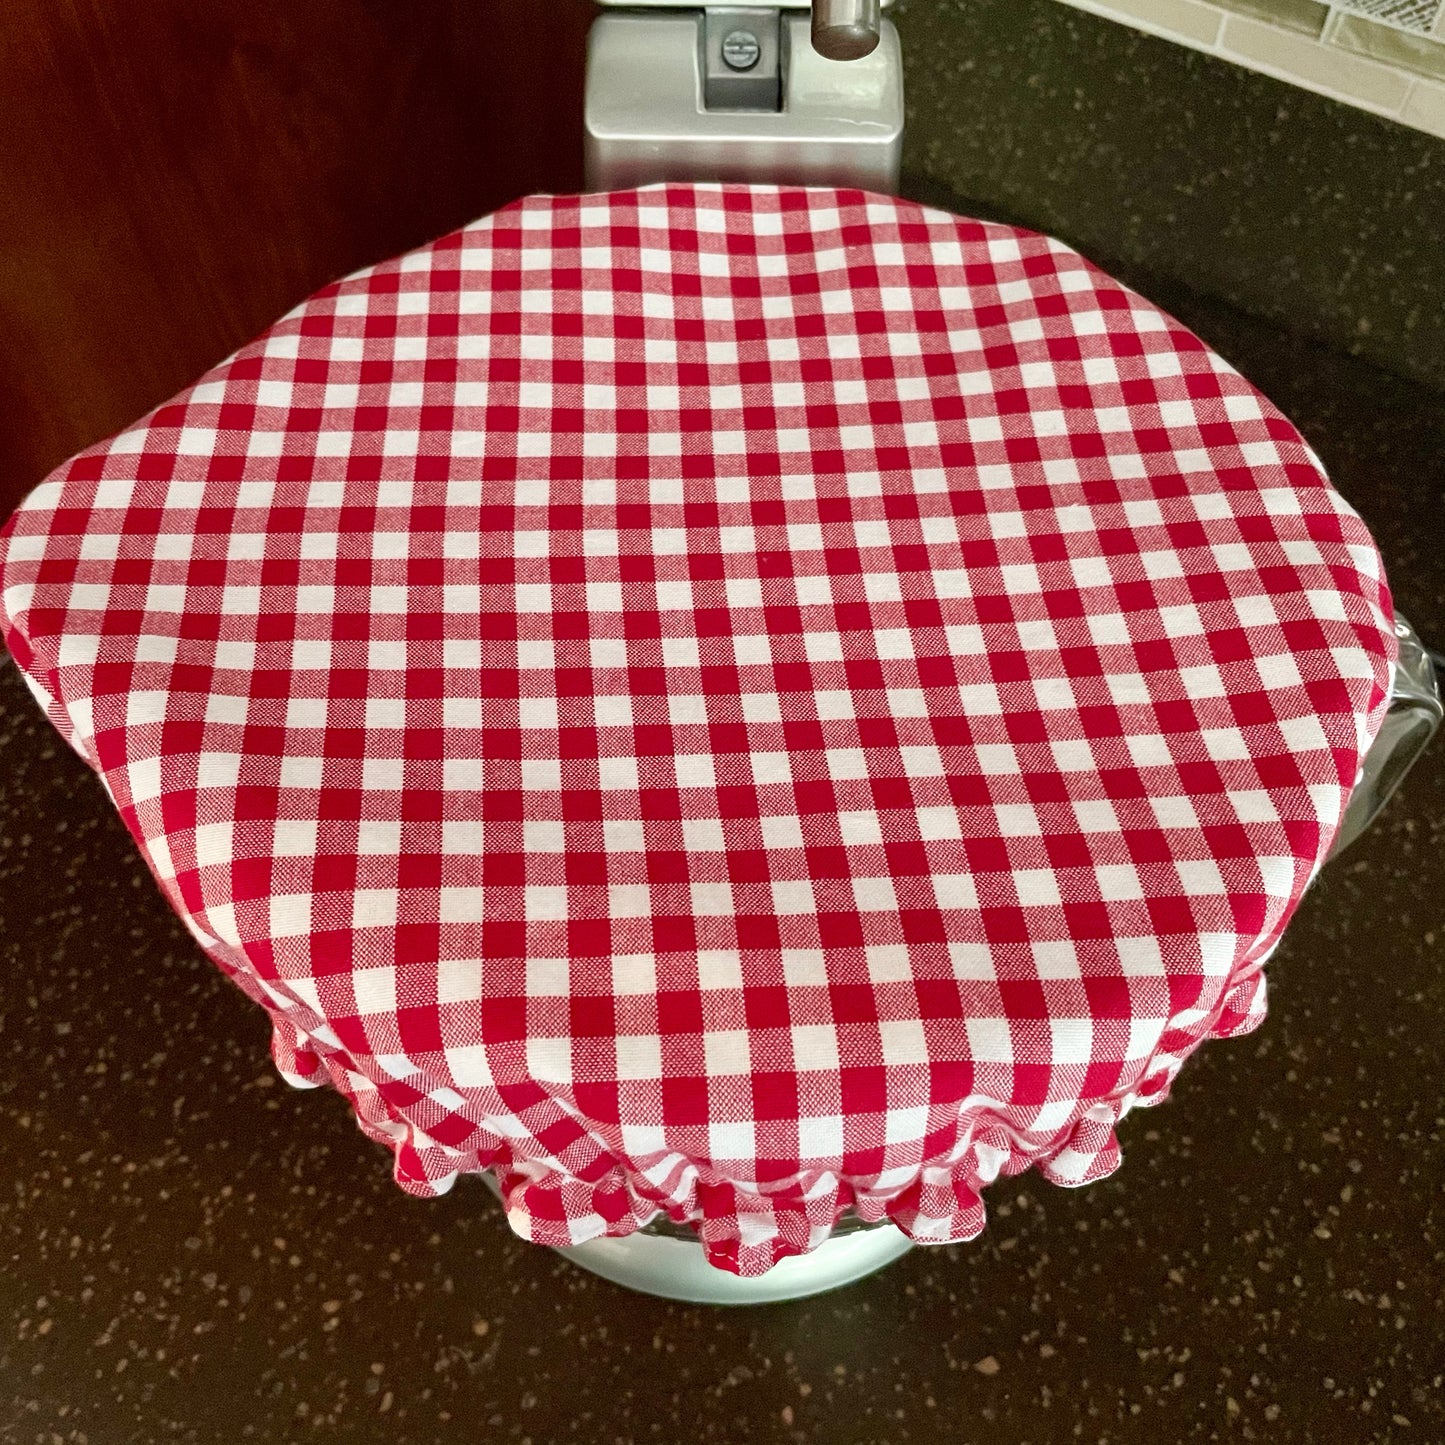 Stand Mixer Bowl Covers - Crimson Red Gingham Check